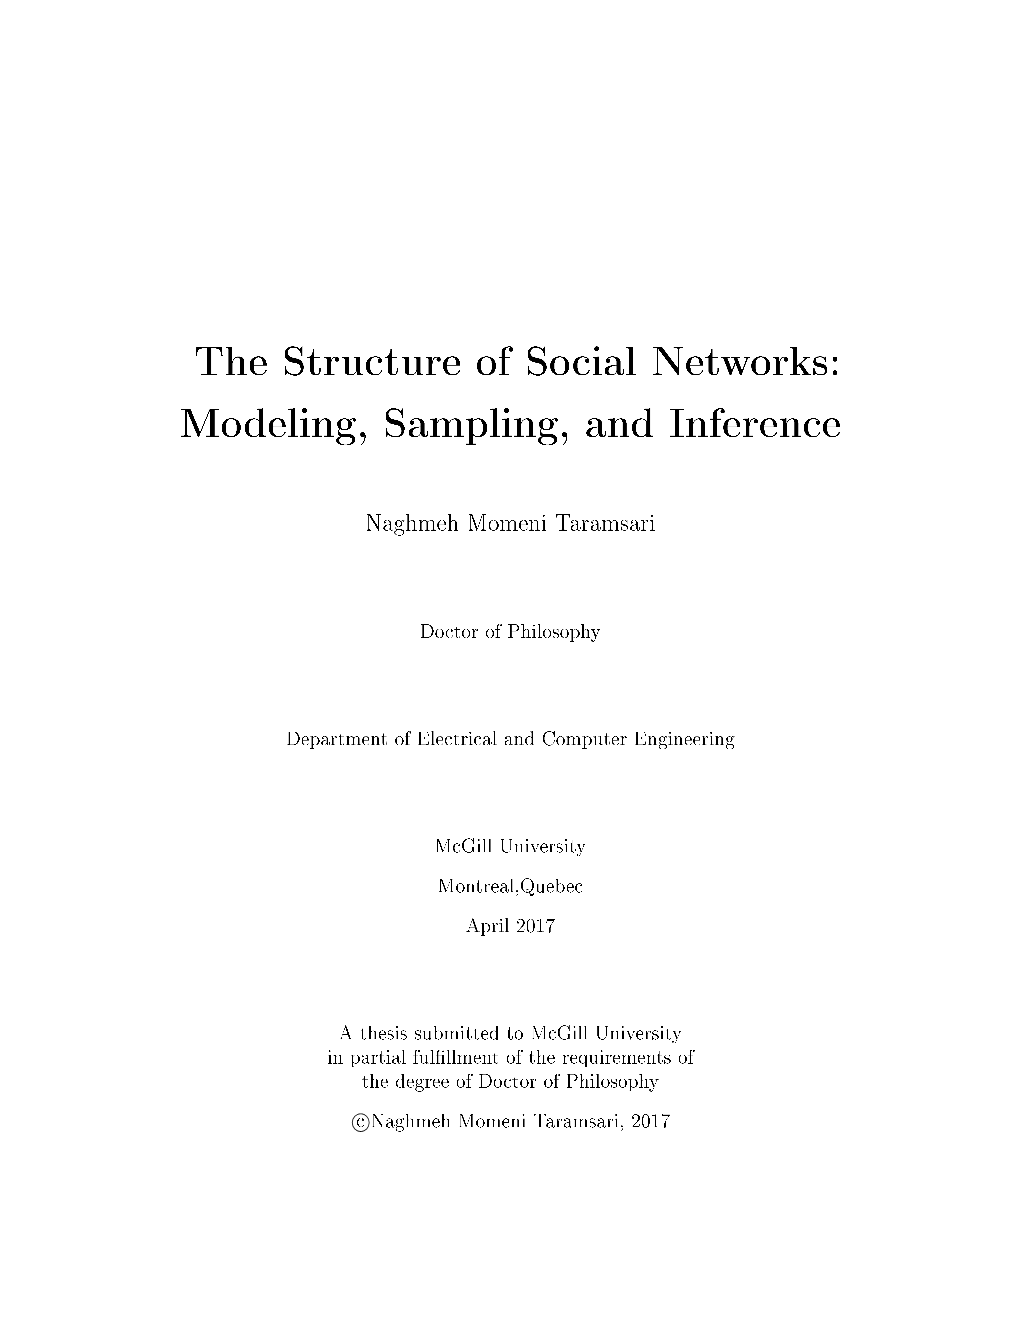 The Structure of Social Networks: Modeling, Sampling, and Inference